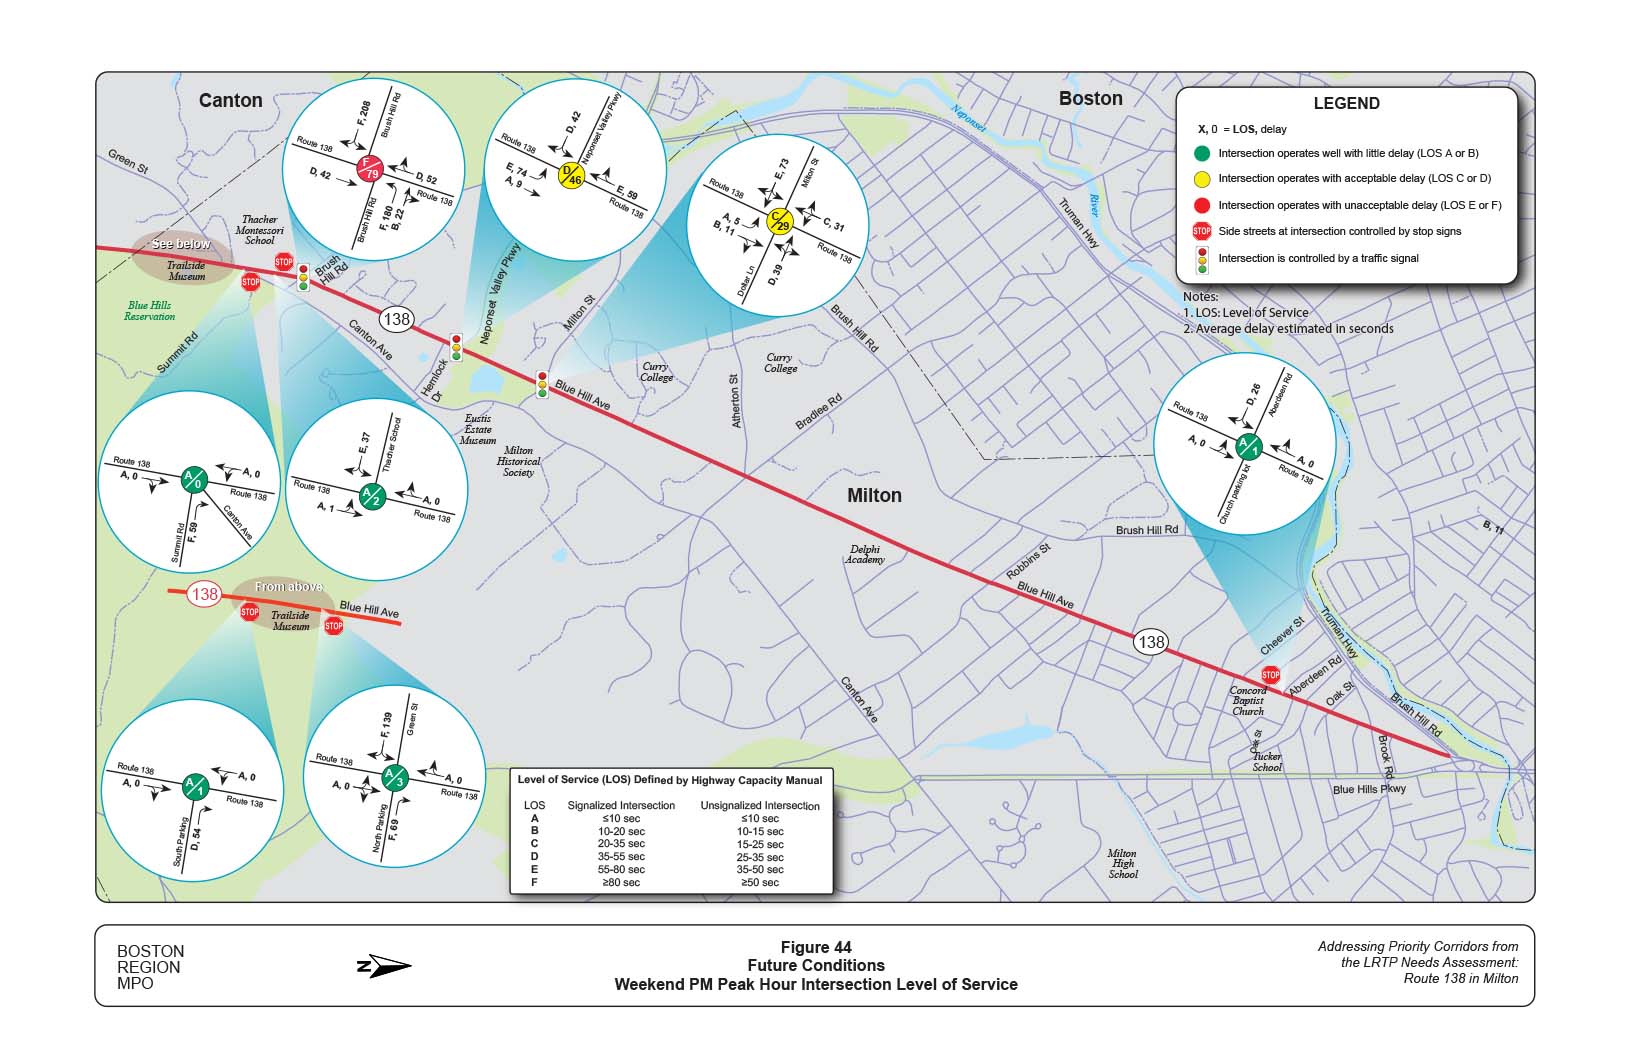 Figure 44 is a map of the study area with diagrams showing future conditions LOS by intersections on Route 138 during the weekend PM peak period.